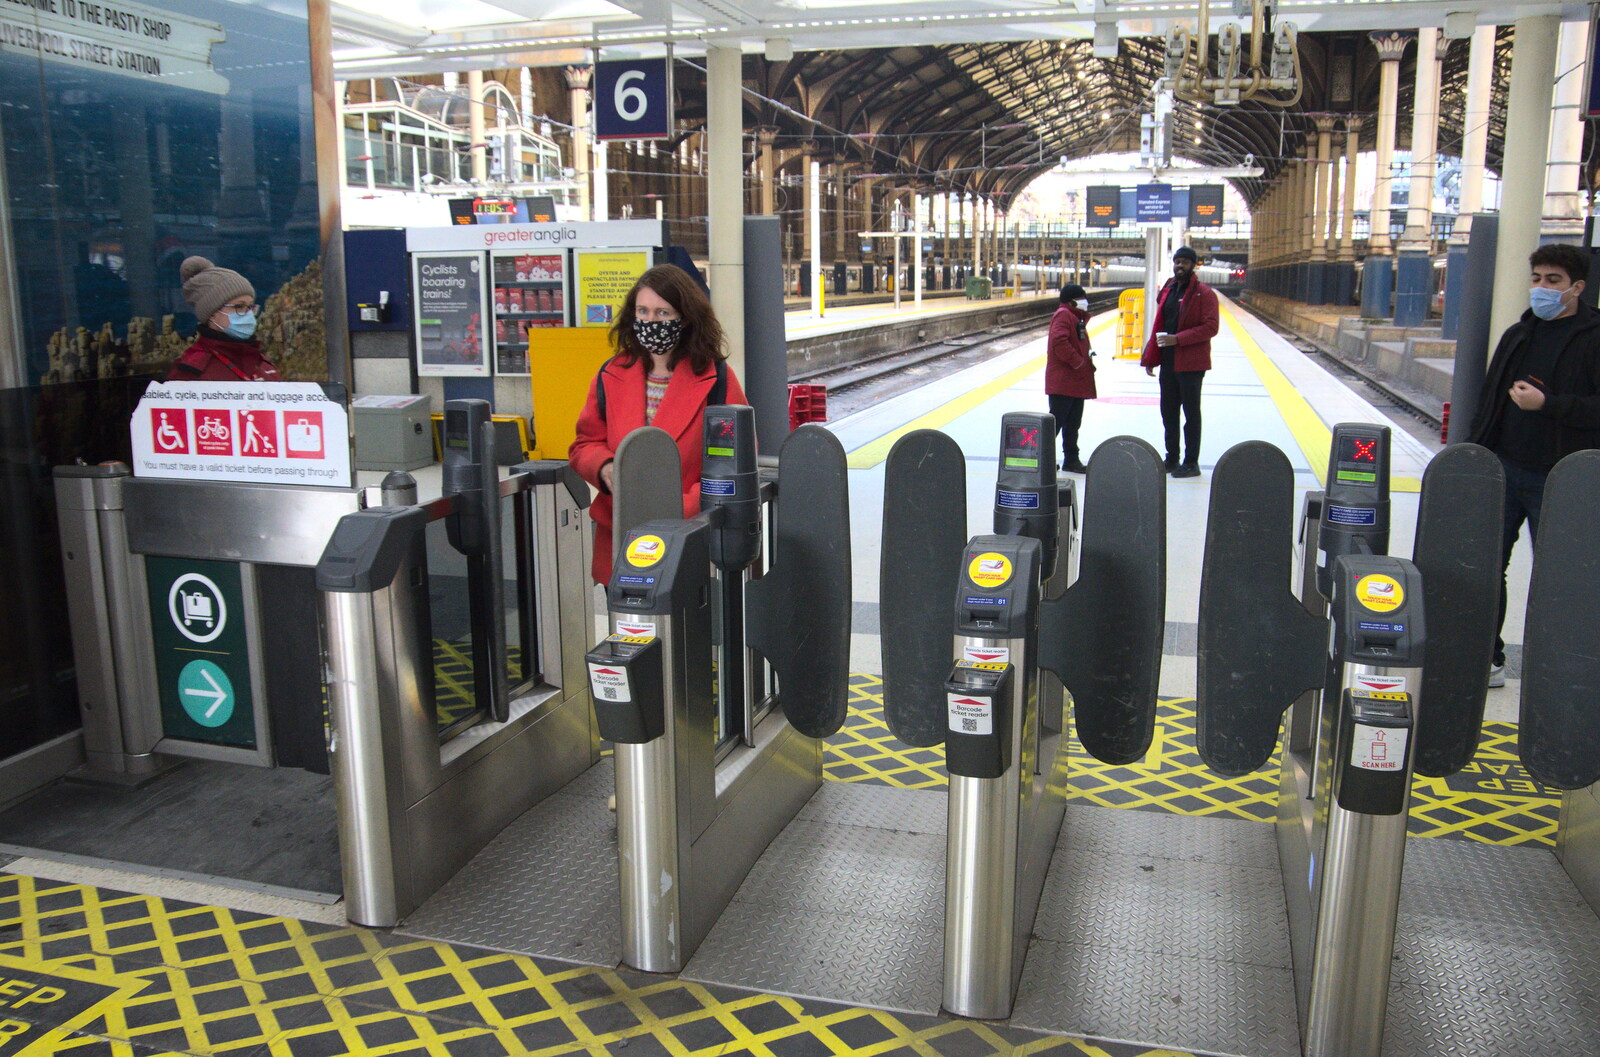 Isobel walks through the ticket barrier from A Trip to the Natural History Museum, Kensington, London - 15th January 2022